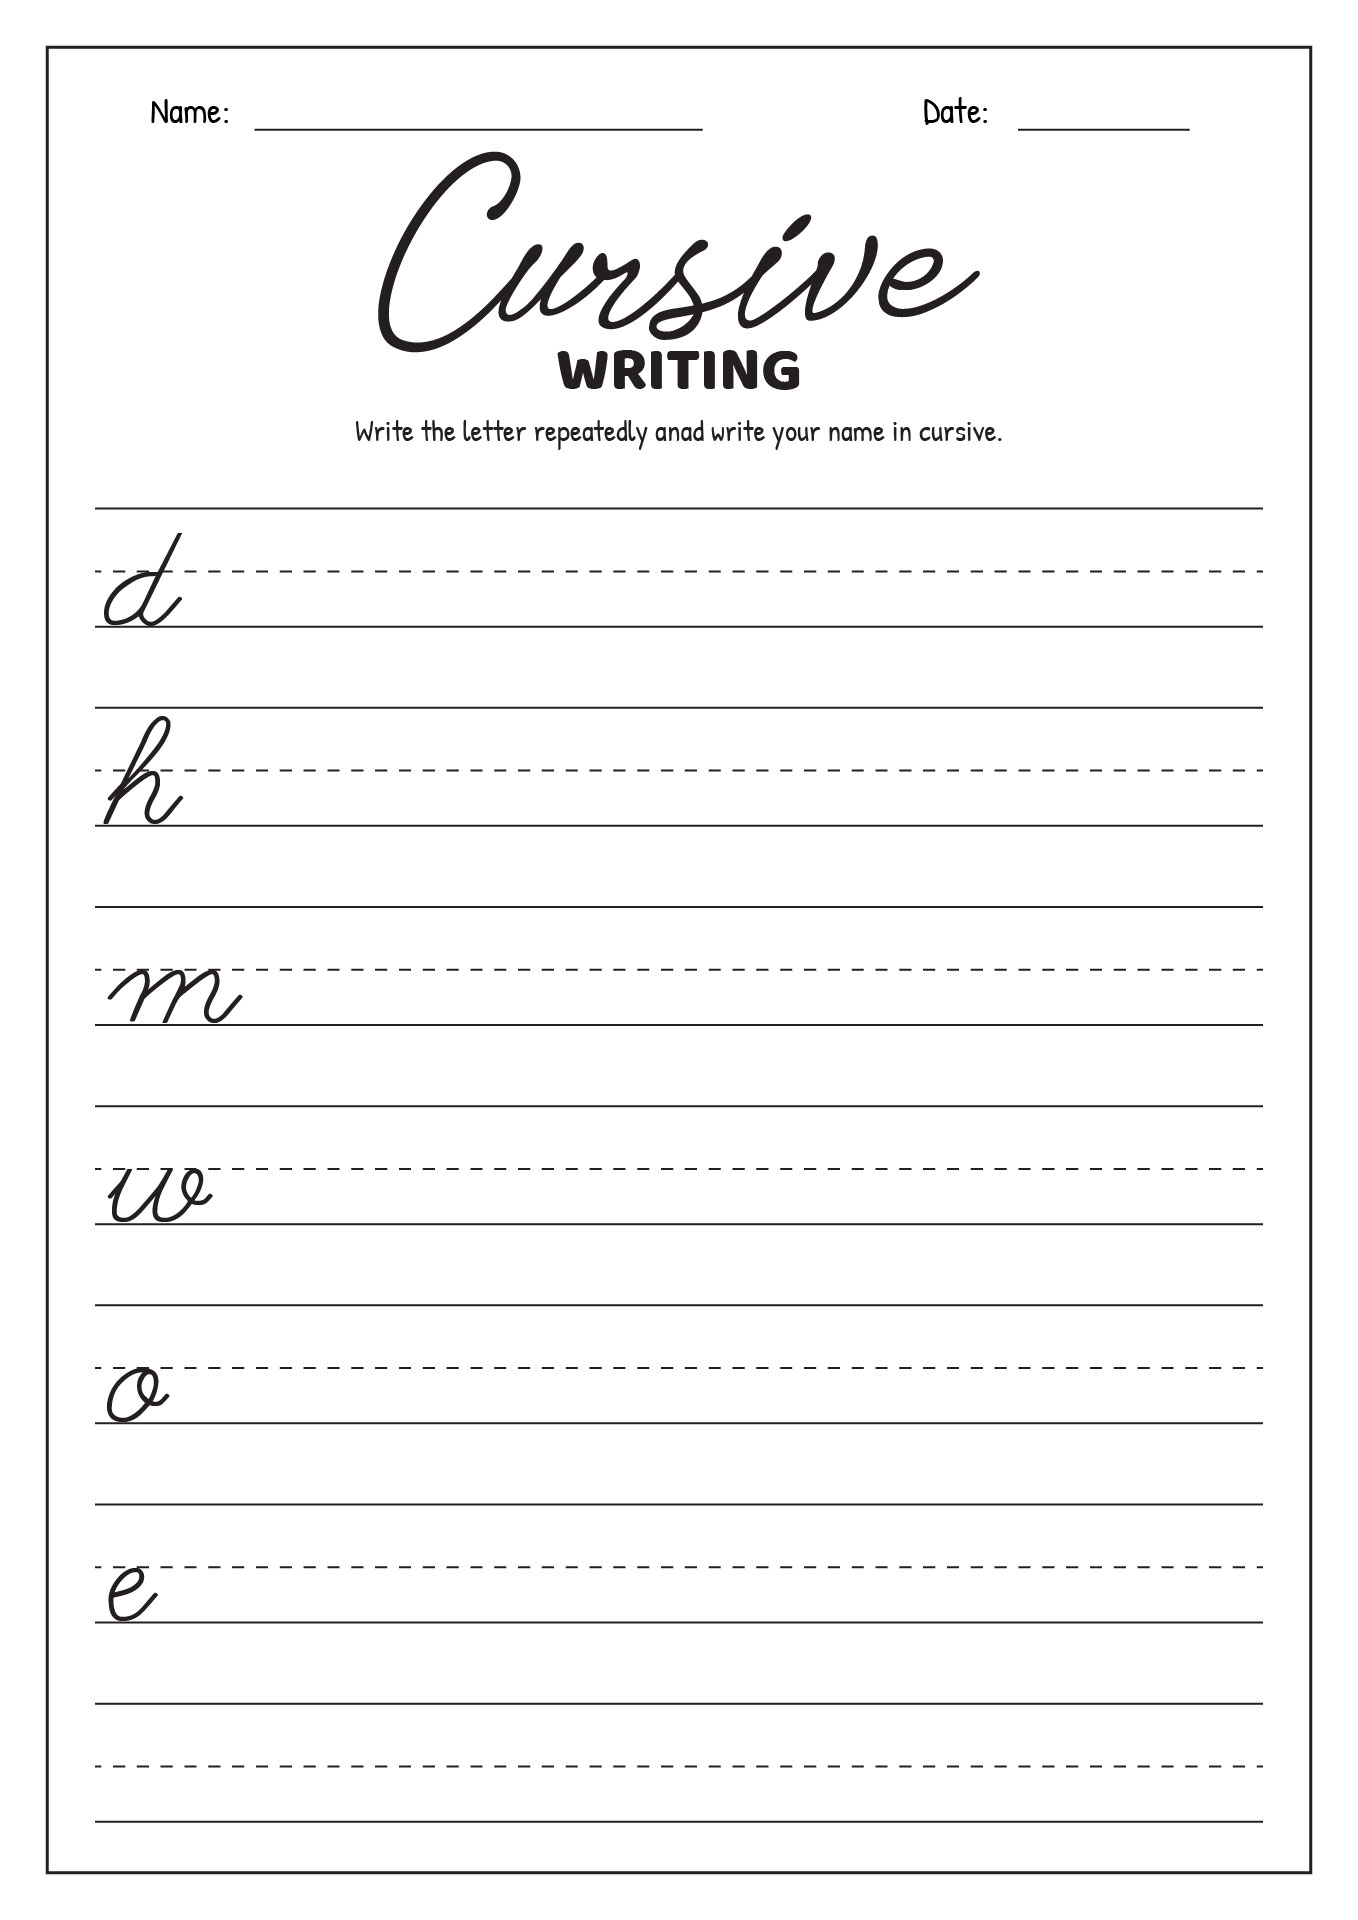 16 Best Images of Cursive Writing Worksheets For 3rd Grade - Free ...